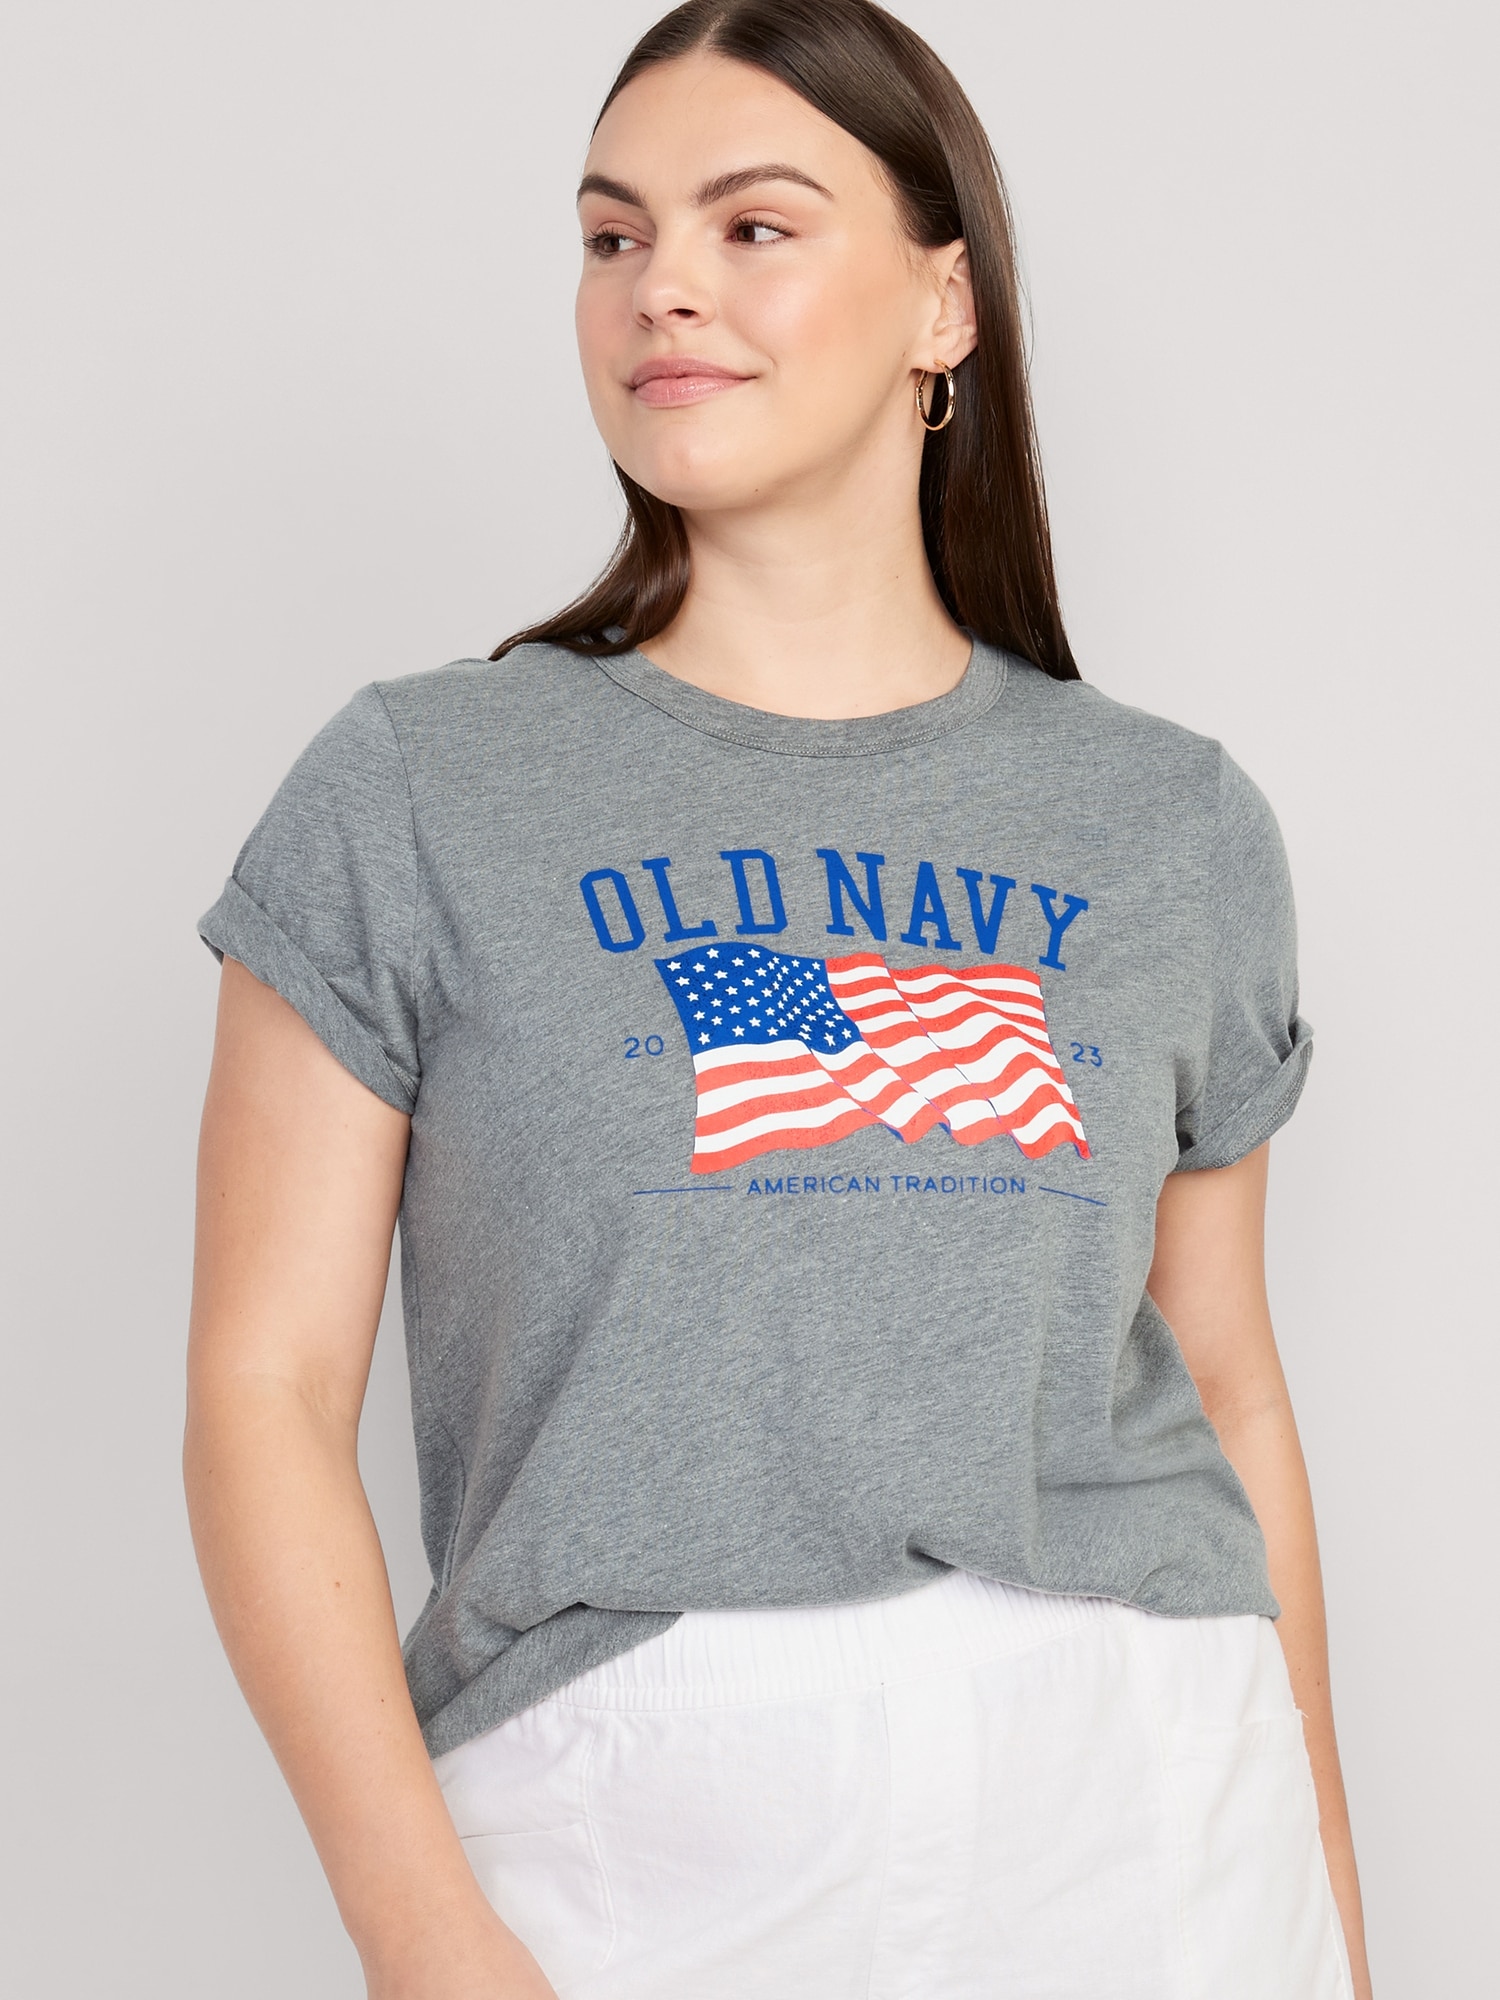 Old Navy - #25yearchallenge: the official shirt of summer/family/the 4th  #tbt #belonginglookslike 🇺🇸 Shop flag tees